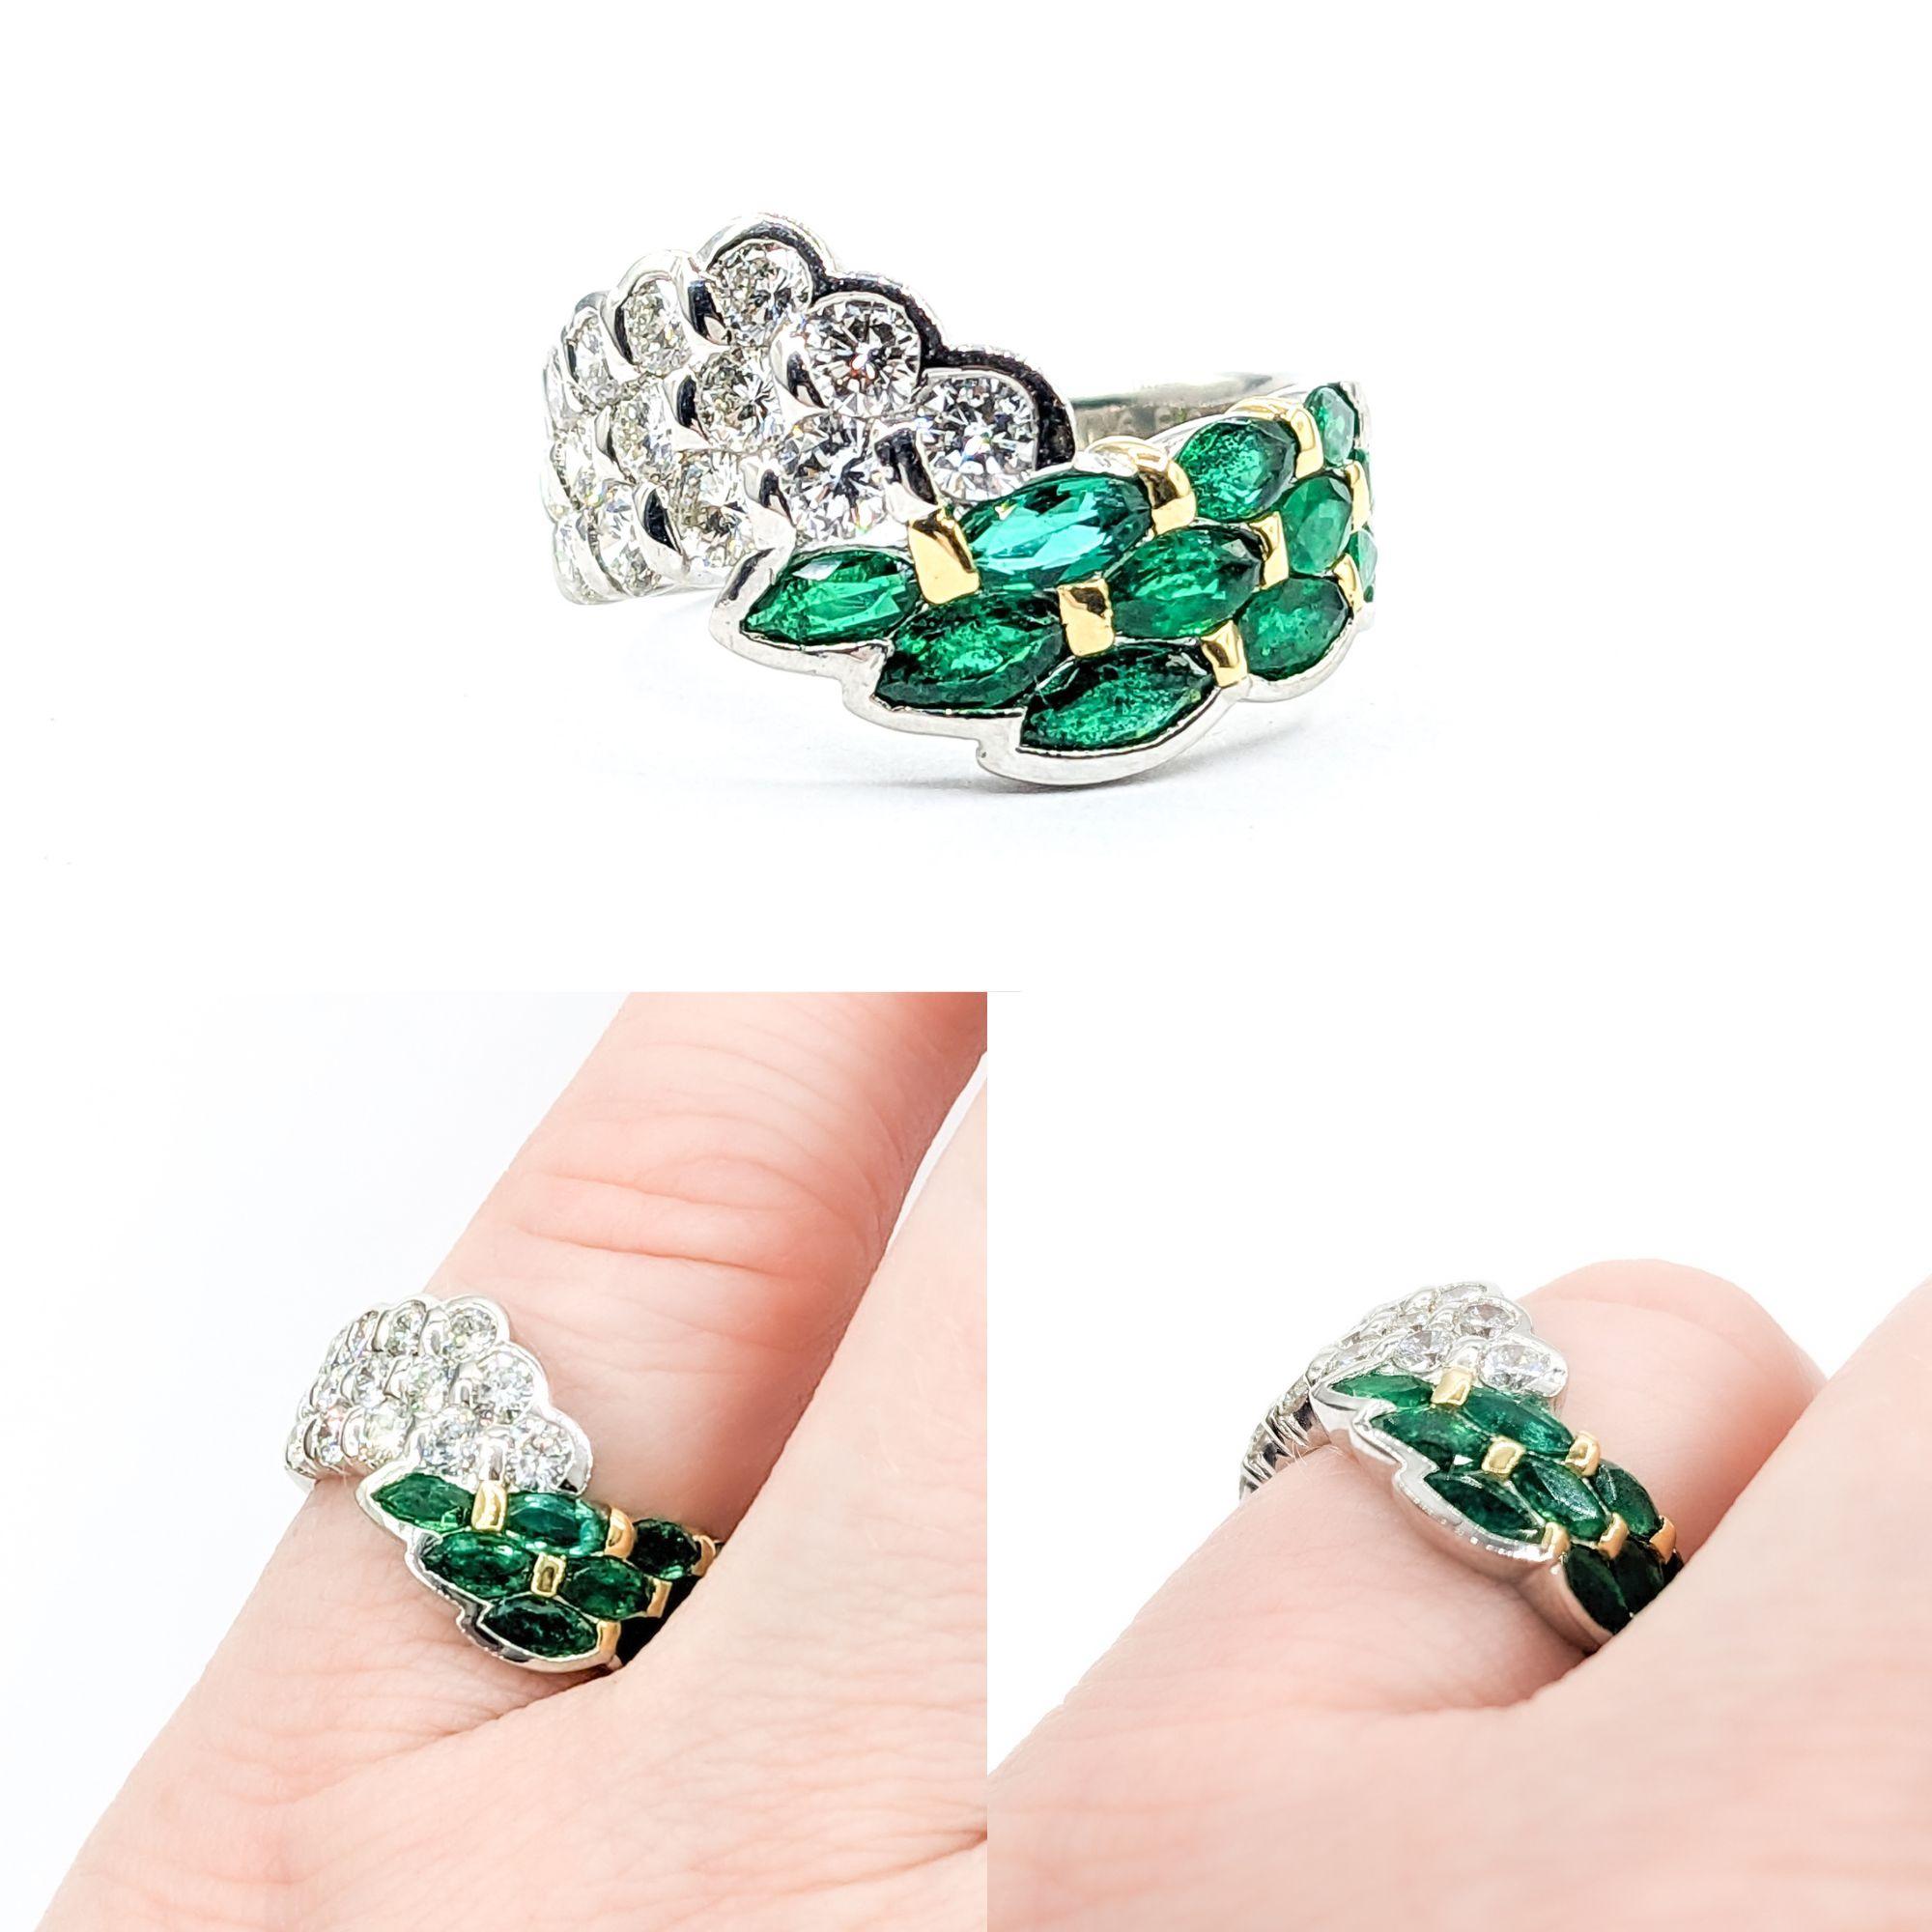 1.05ctw Emerald & 0.89ctw Diamond Ring In white Gold

This exquisite gemstone fashion ring, masterfully crafted in 14kt white gold, showcases a stunning 1.05ctw emerald centerpiece. Surrounded by 0.89ctw of round diamonds with SI clarity and a near